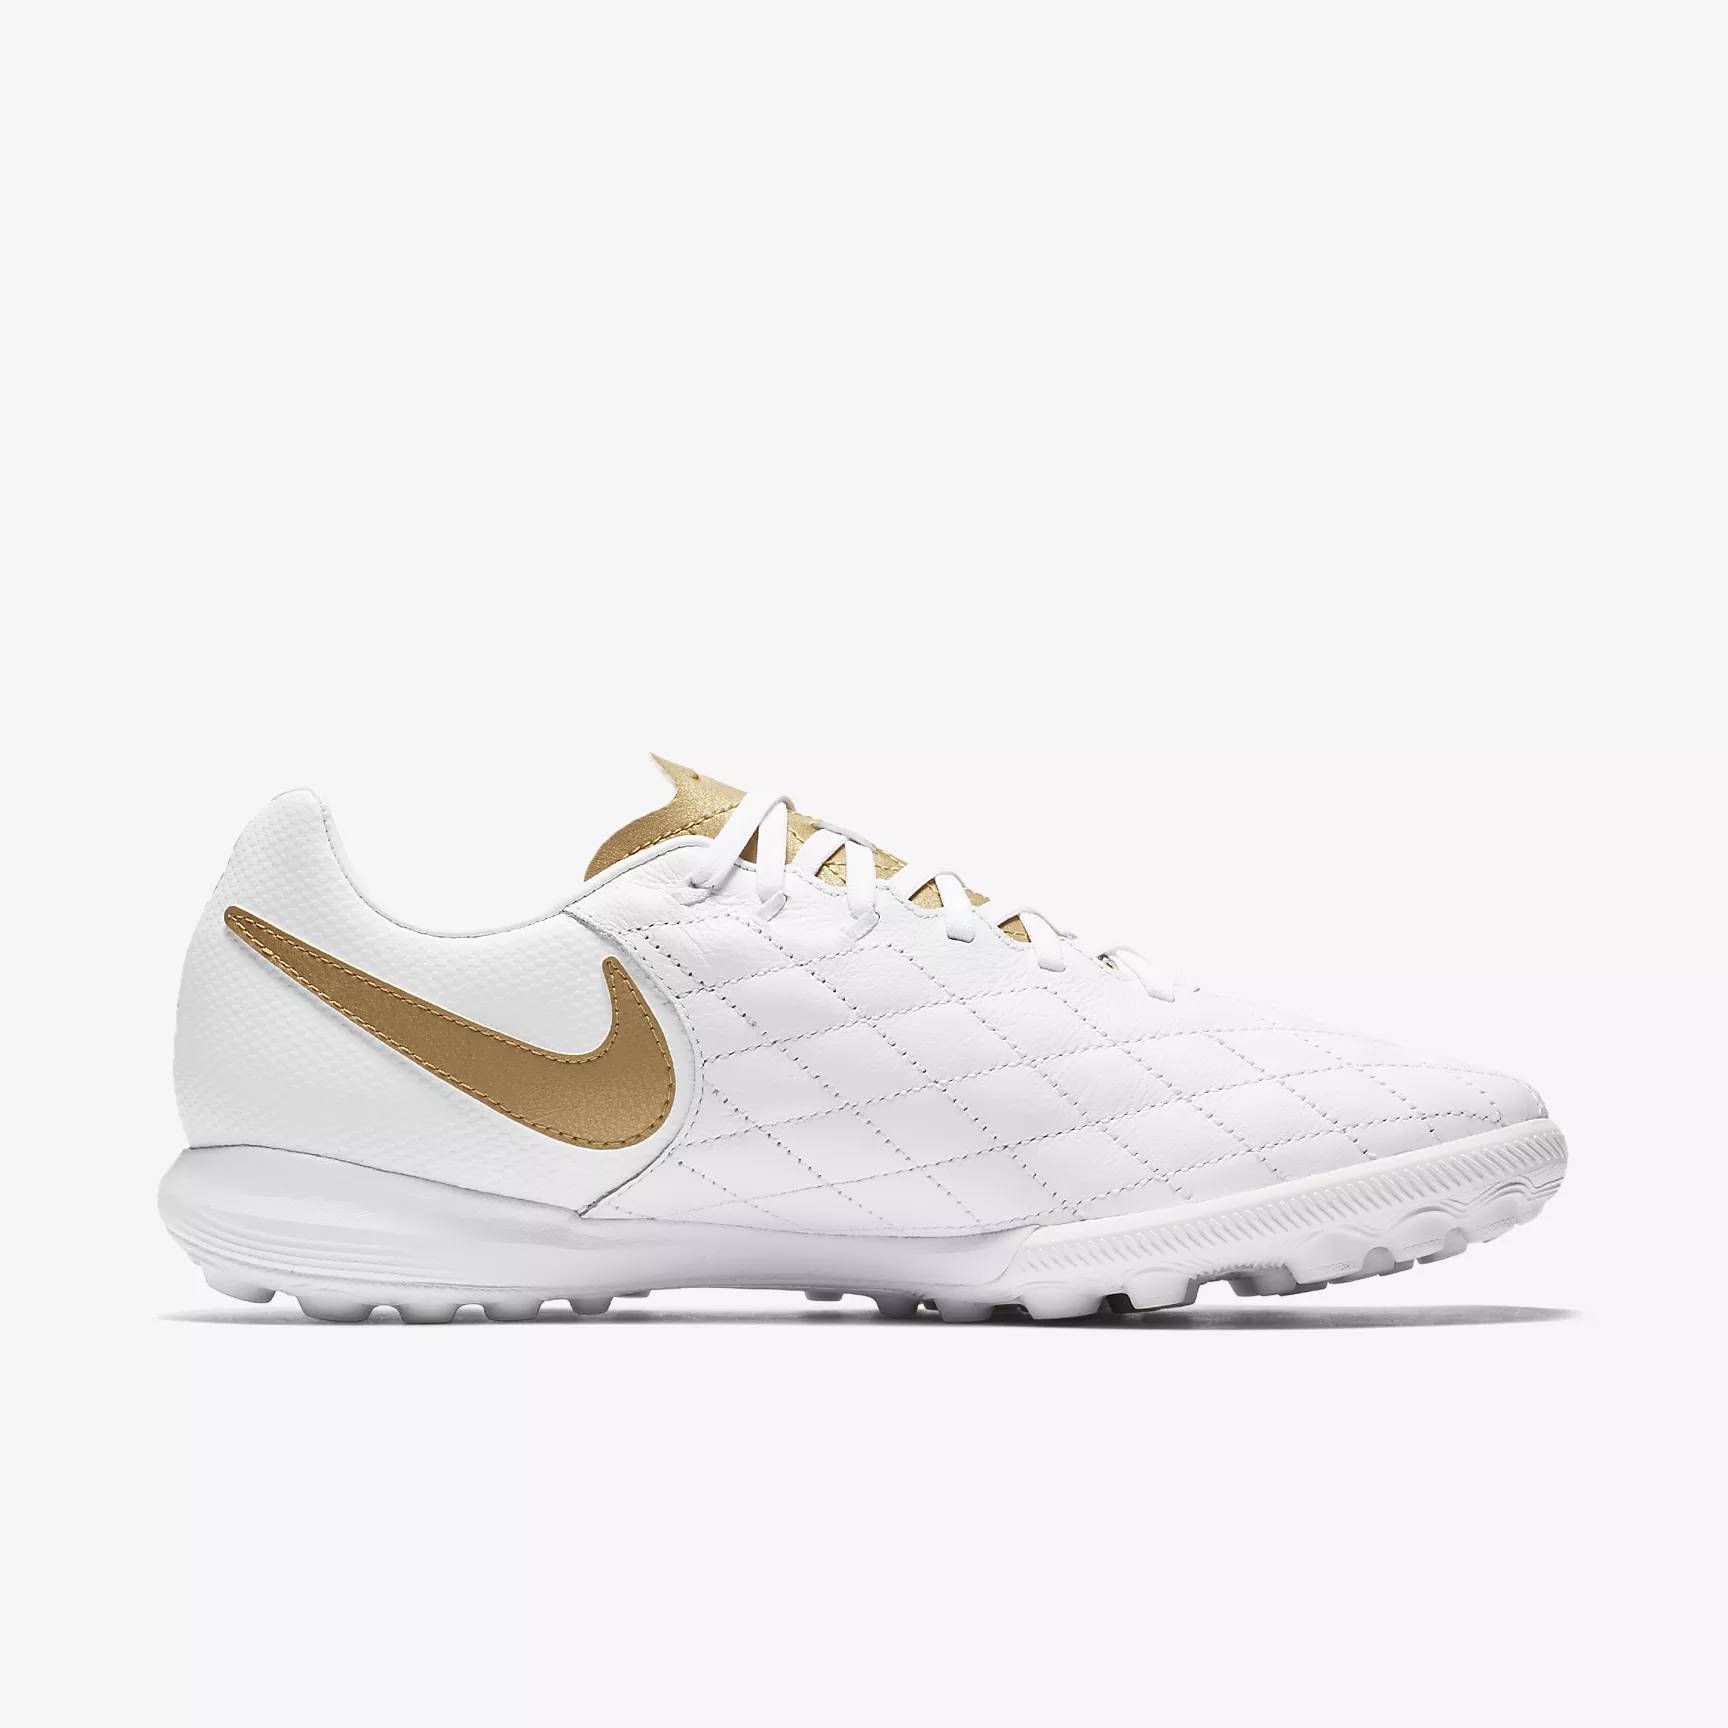 Exclusion Mixed Laziness Nike TiempoX Lunar Legend VII Pro 10R TF - White / White / Metallic Gold -  Football Shirt Culture - Latest Football Kit News and More